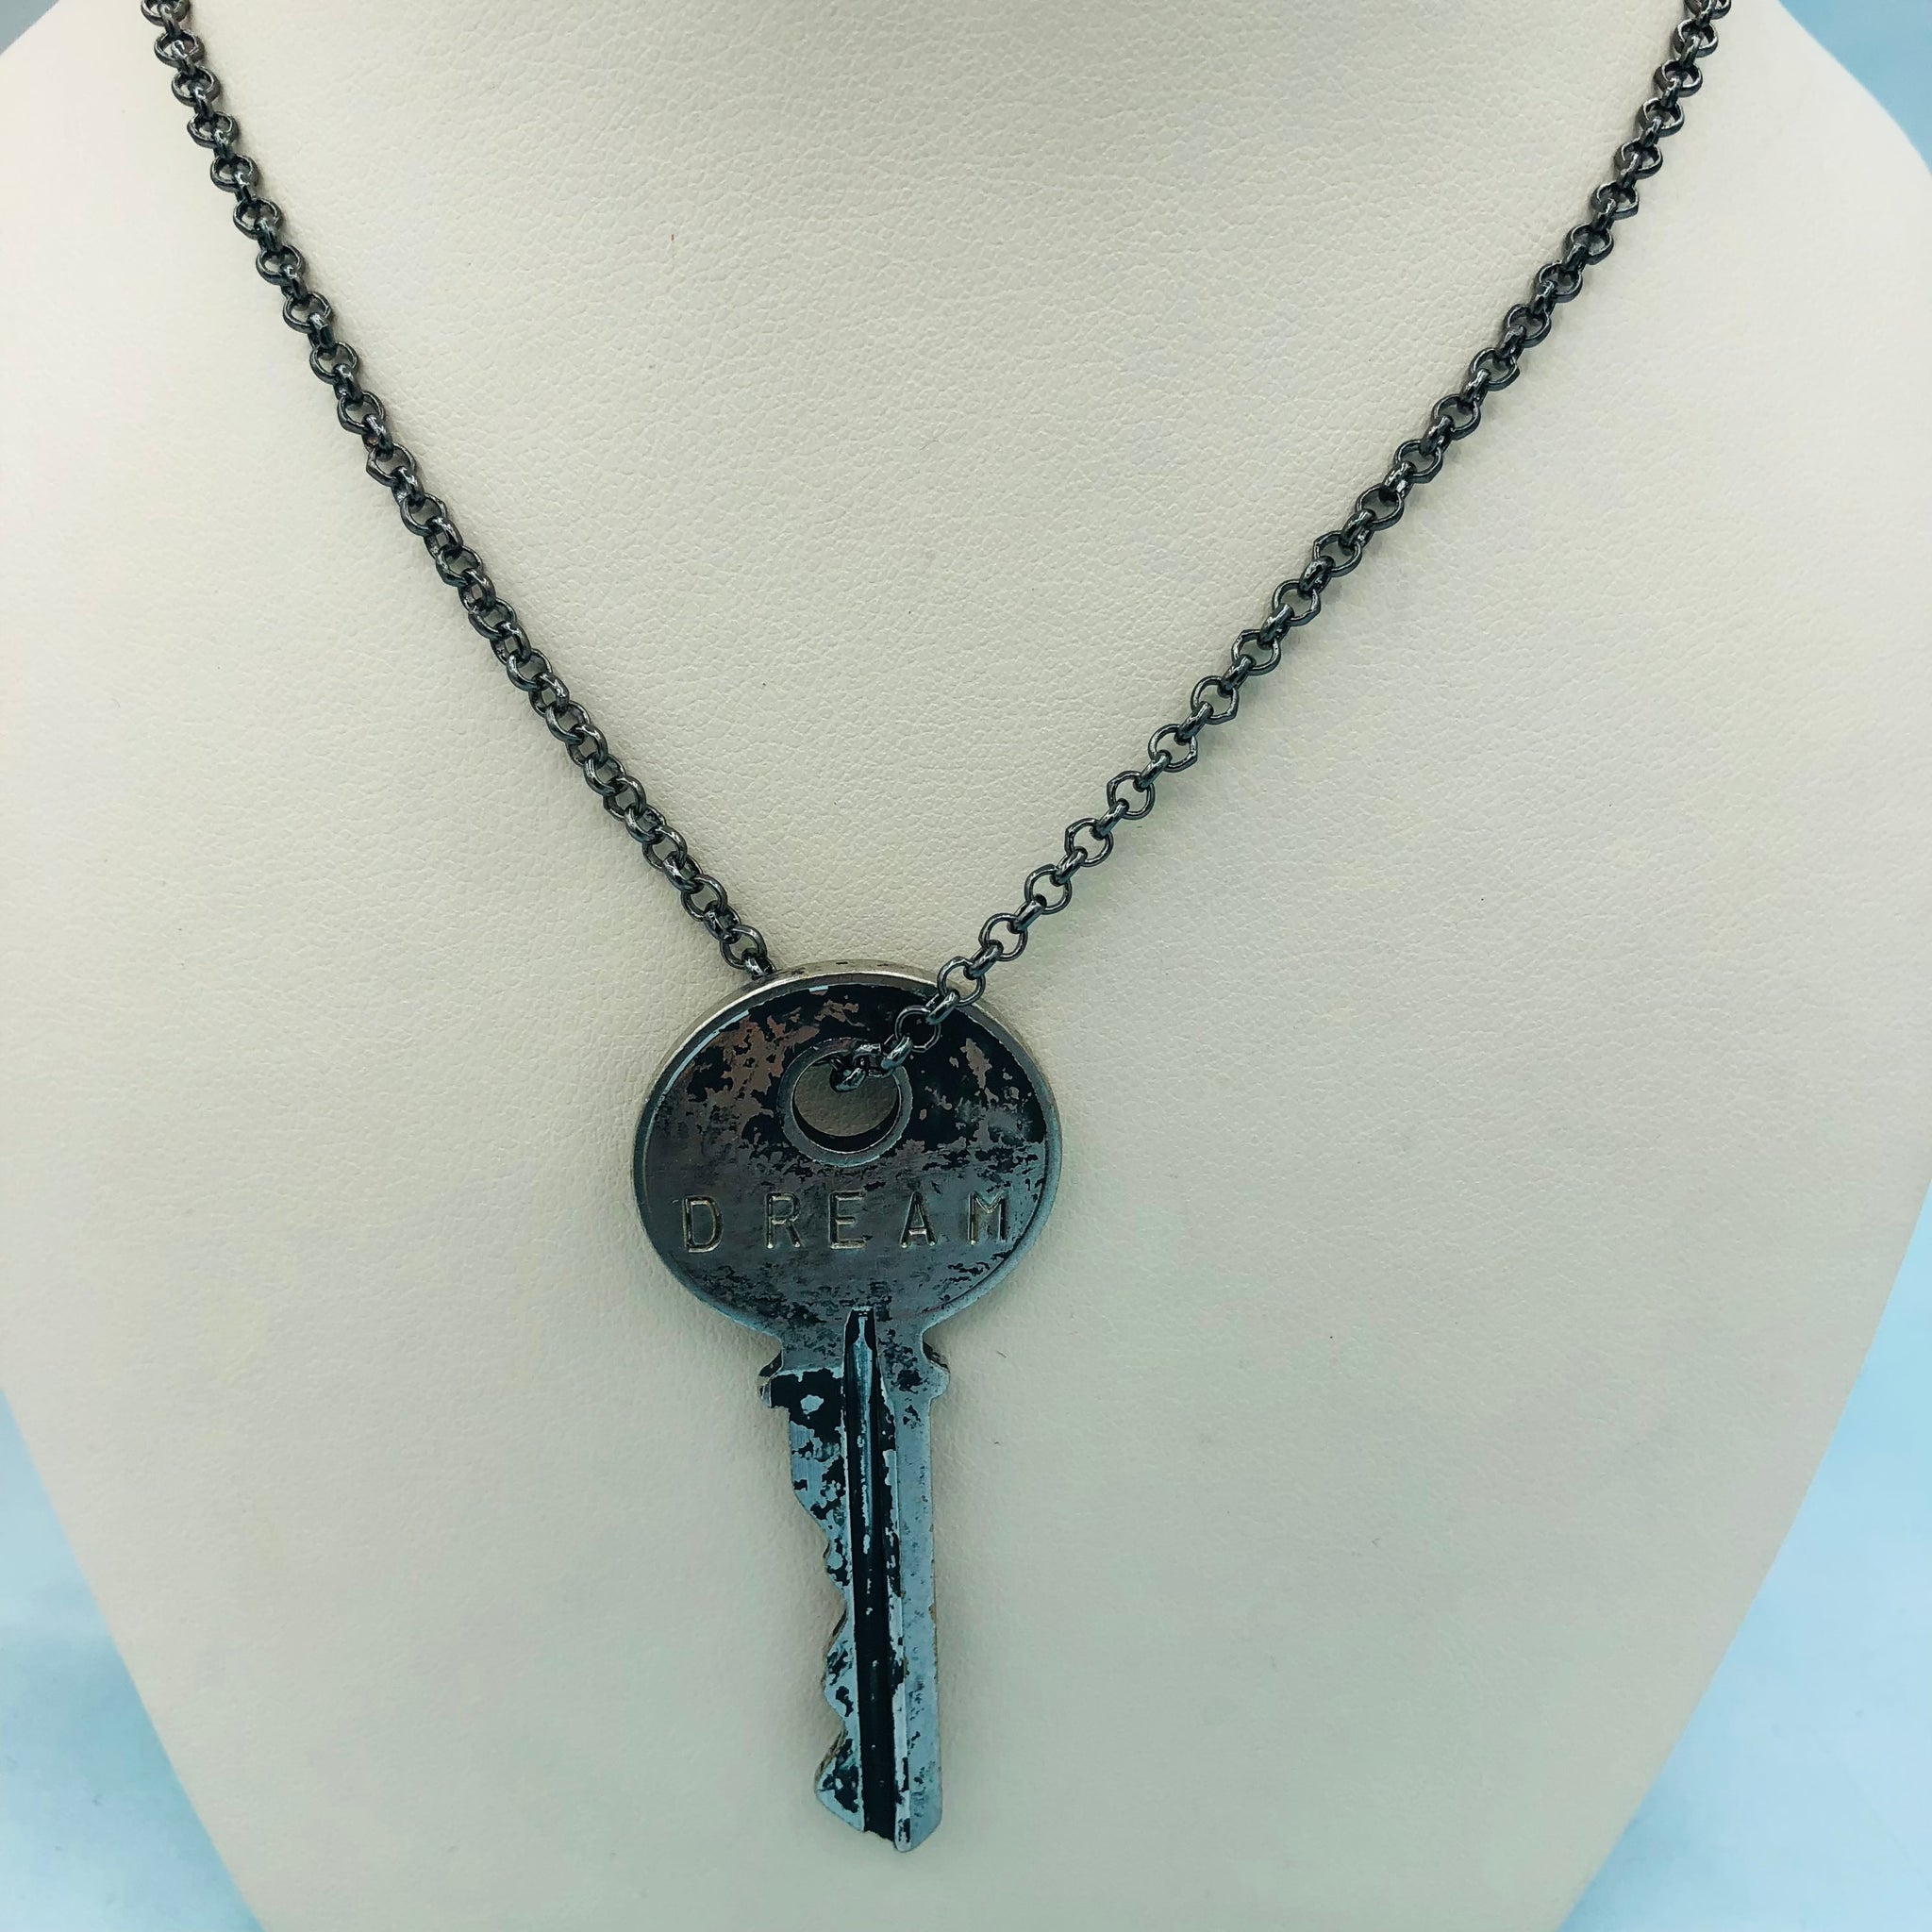 Blue Marbled Key Necklace Magic Marbled Key Skeleton Key Necklace Vintage  Style Key Glass Cabochon Necklace Romantic Gifts For Her Keys